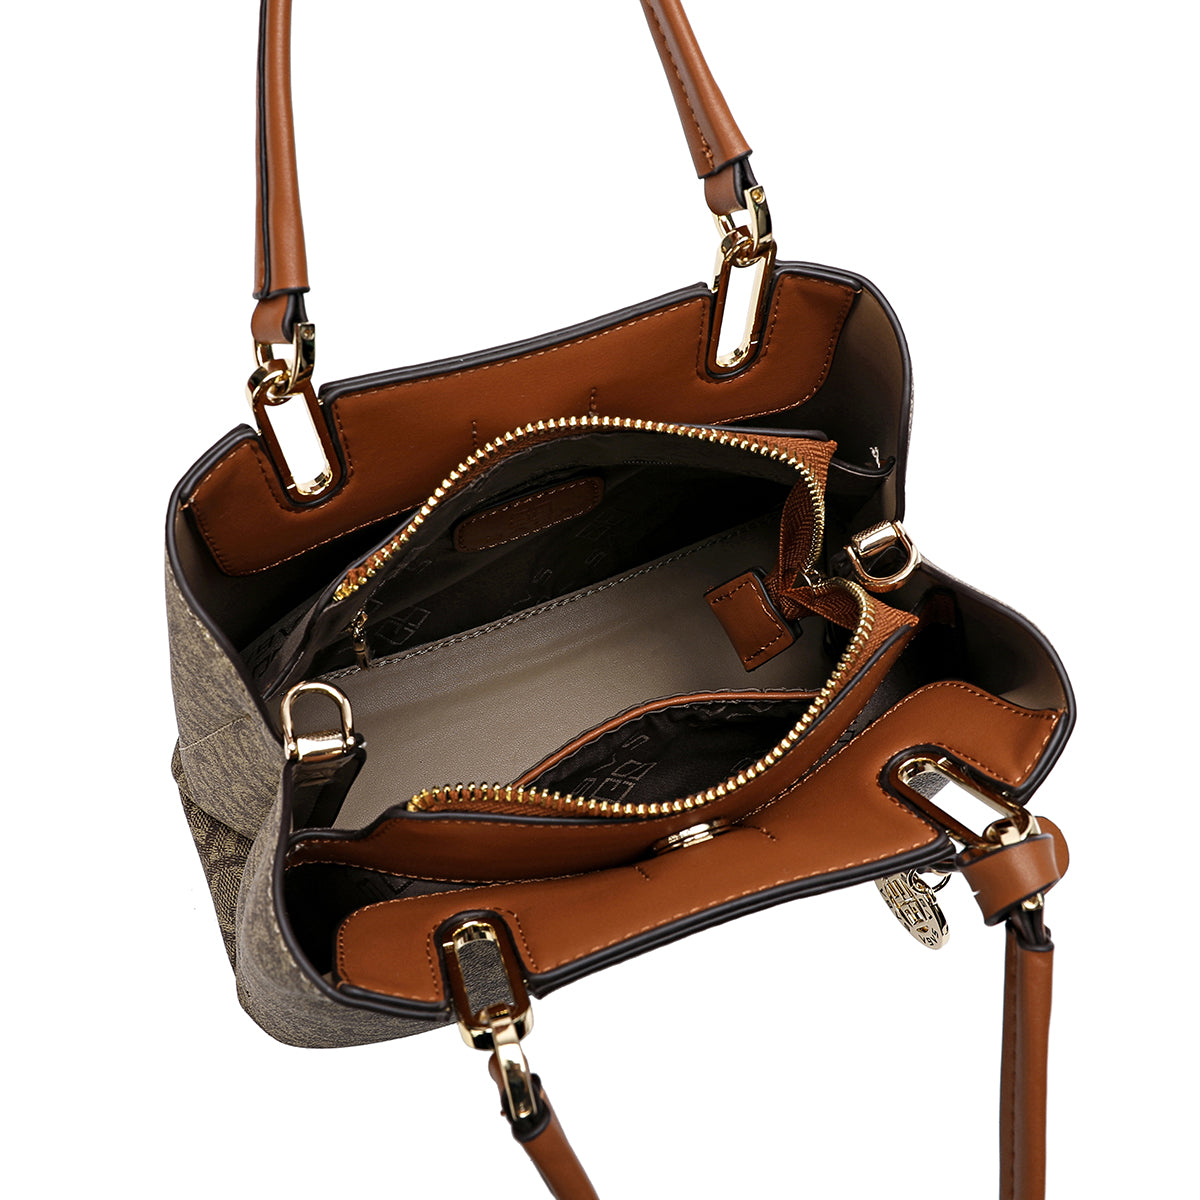 Handbag, attractive and simple design, width 24 cm, in two colors